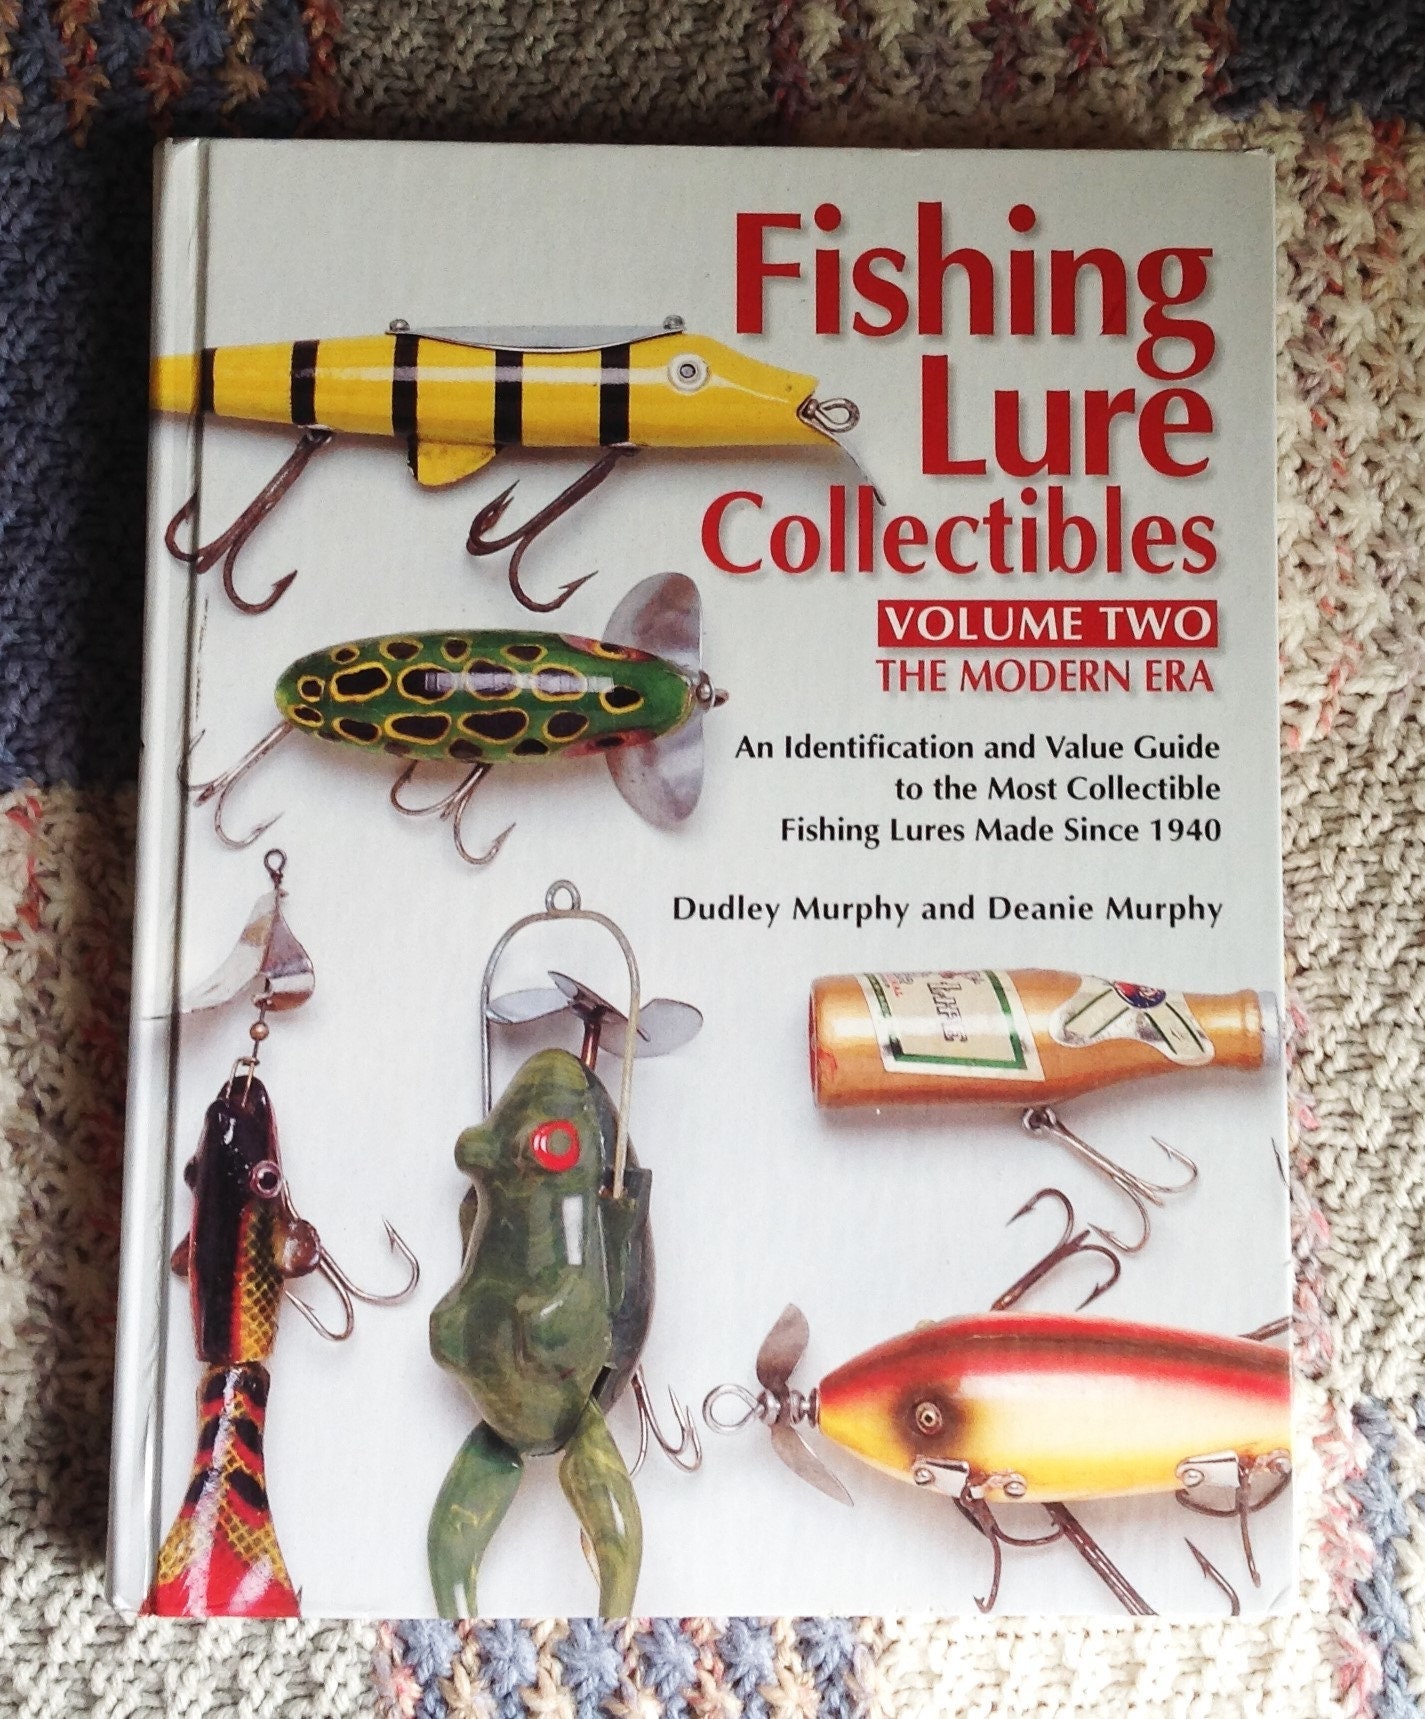 Fishing Lure Collectibles Volume Two the Modern Era: an